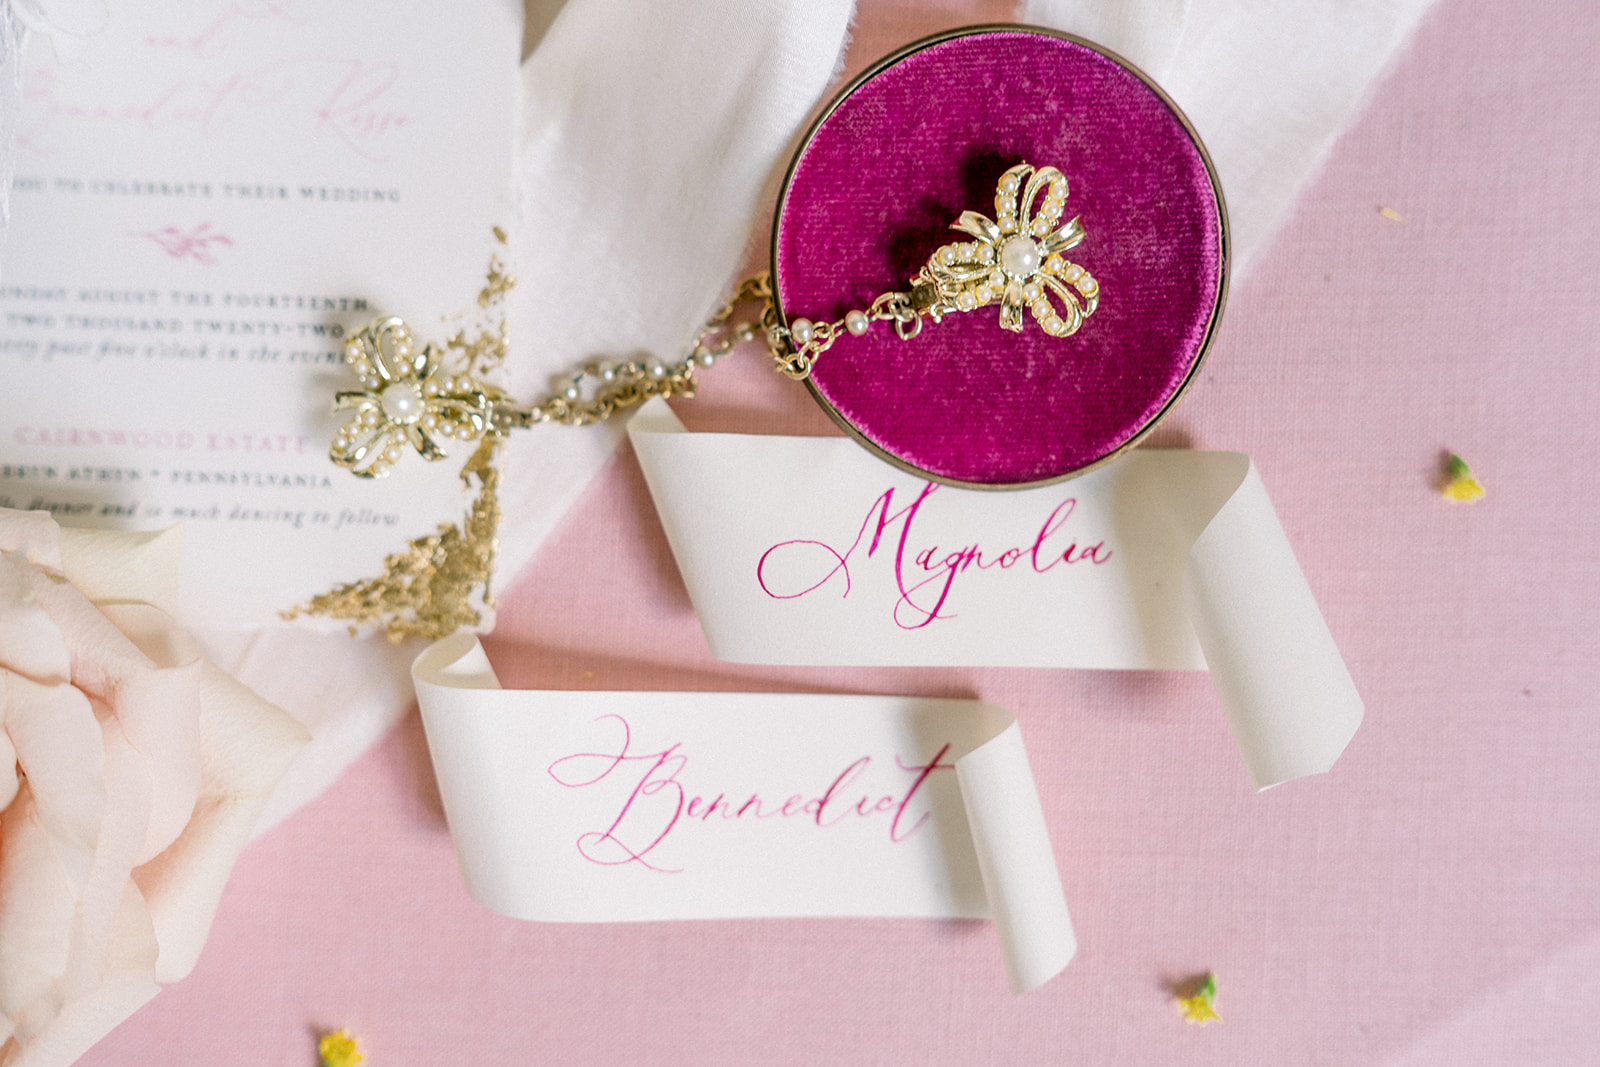 Pink wedding calligraphy place cards add a touch of luxury to details at a destination wedding at Cairnwood Estate